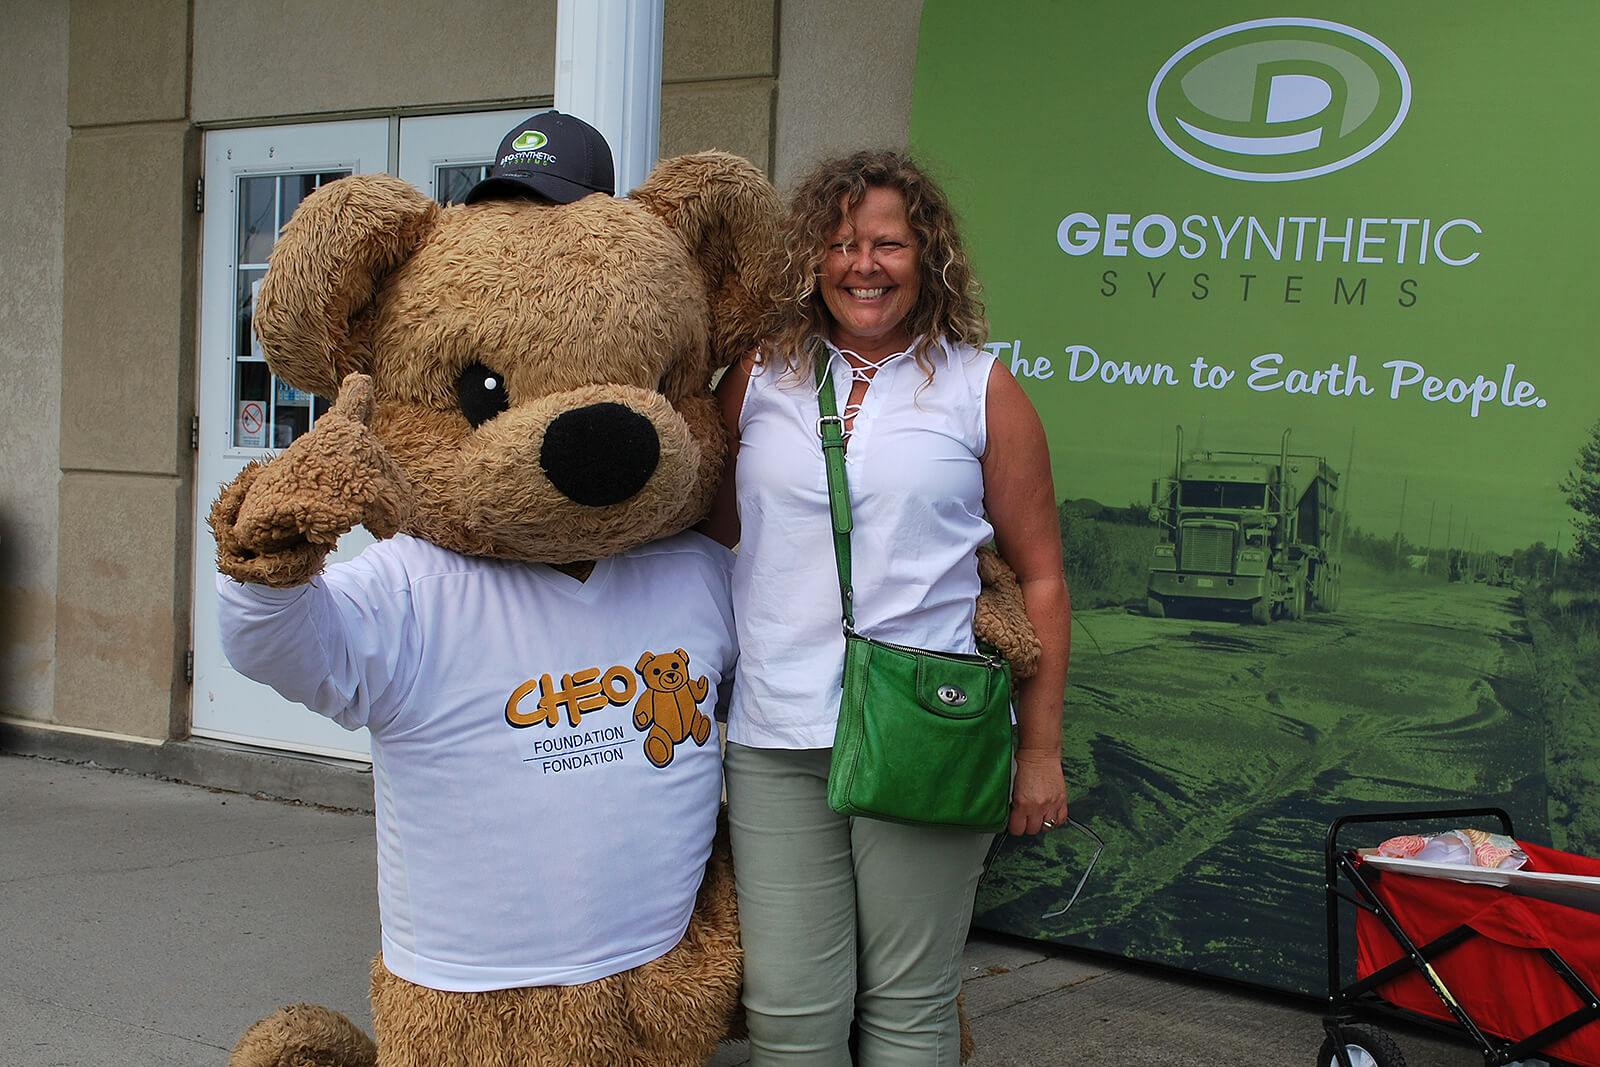 Presenting sponsor Geosynthetic Systems